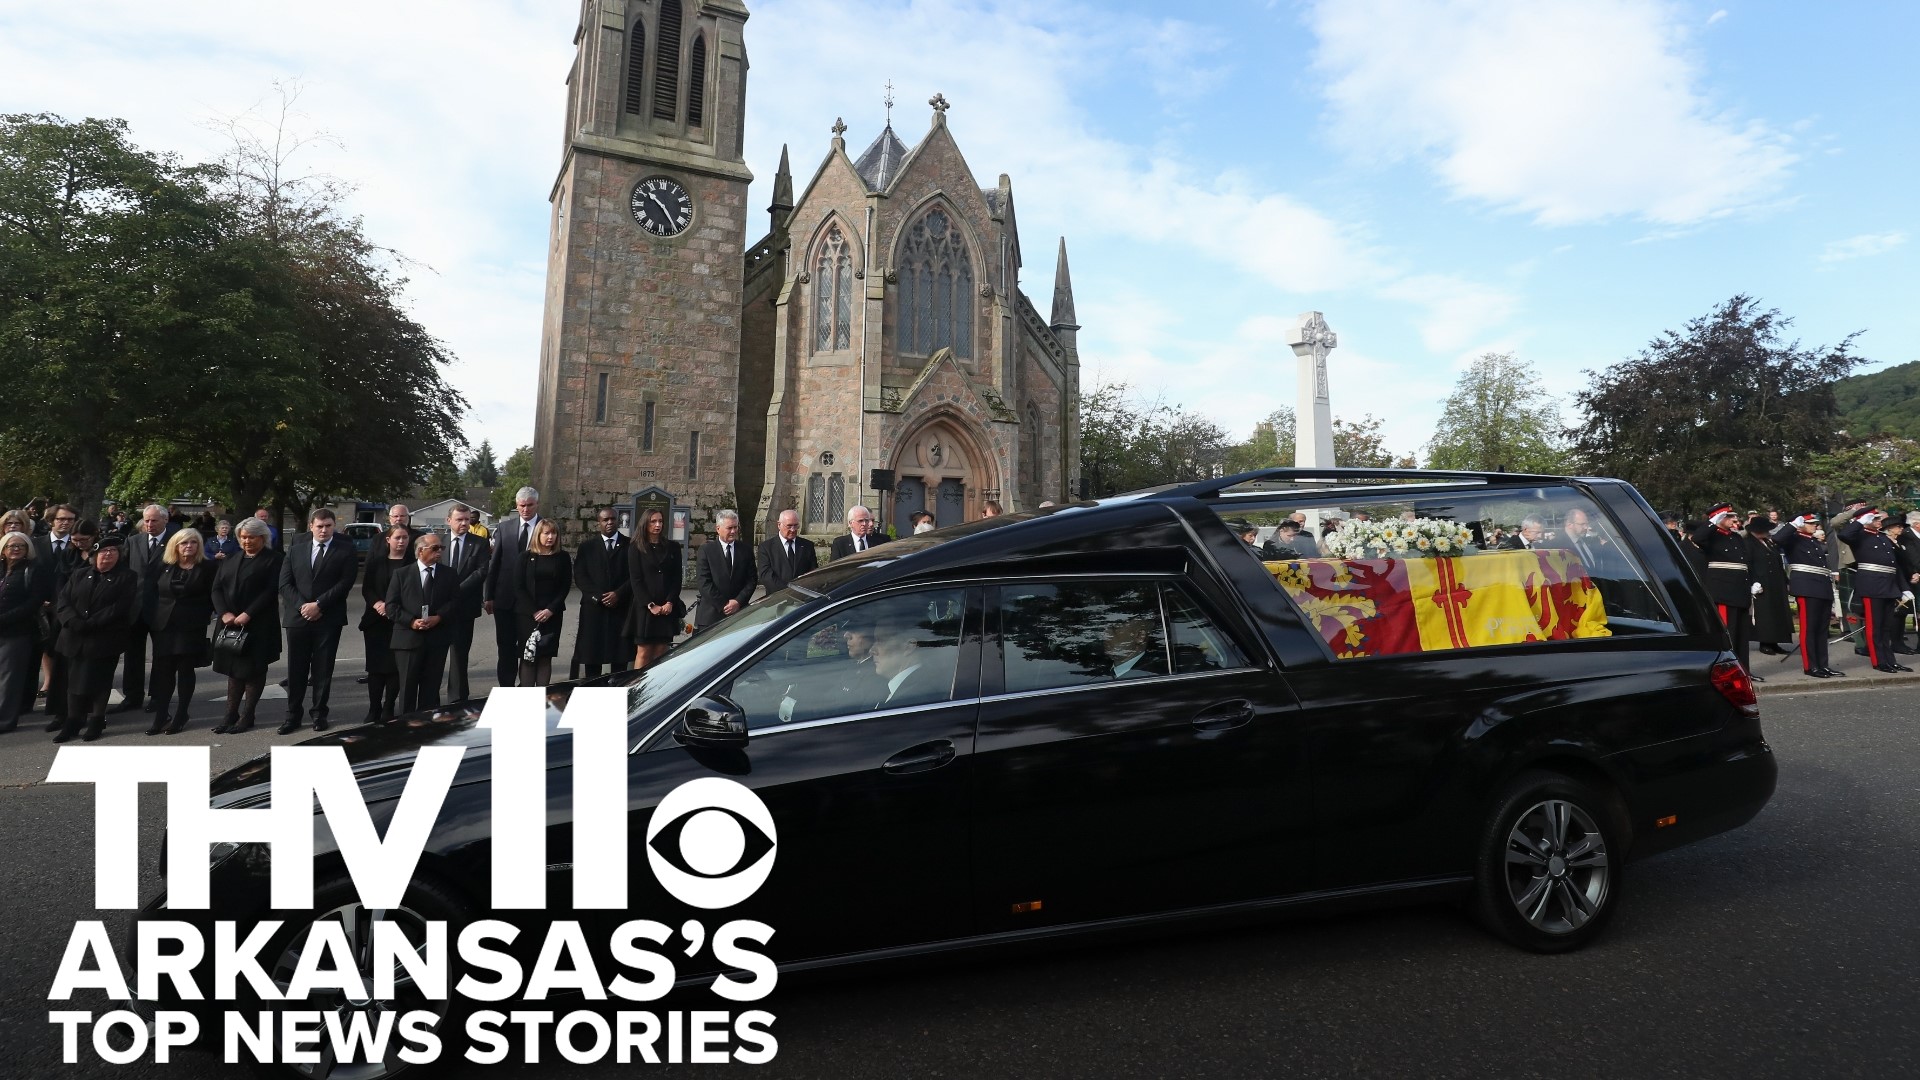 Sarah Horbacewicz delivers Arkansas's top news stories for September 11, 2022, including people continuing to remember Queen Elizabeth II, and greeting the hearse.